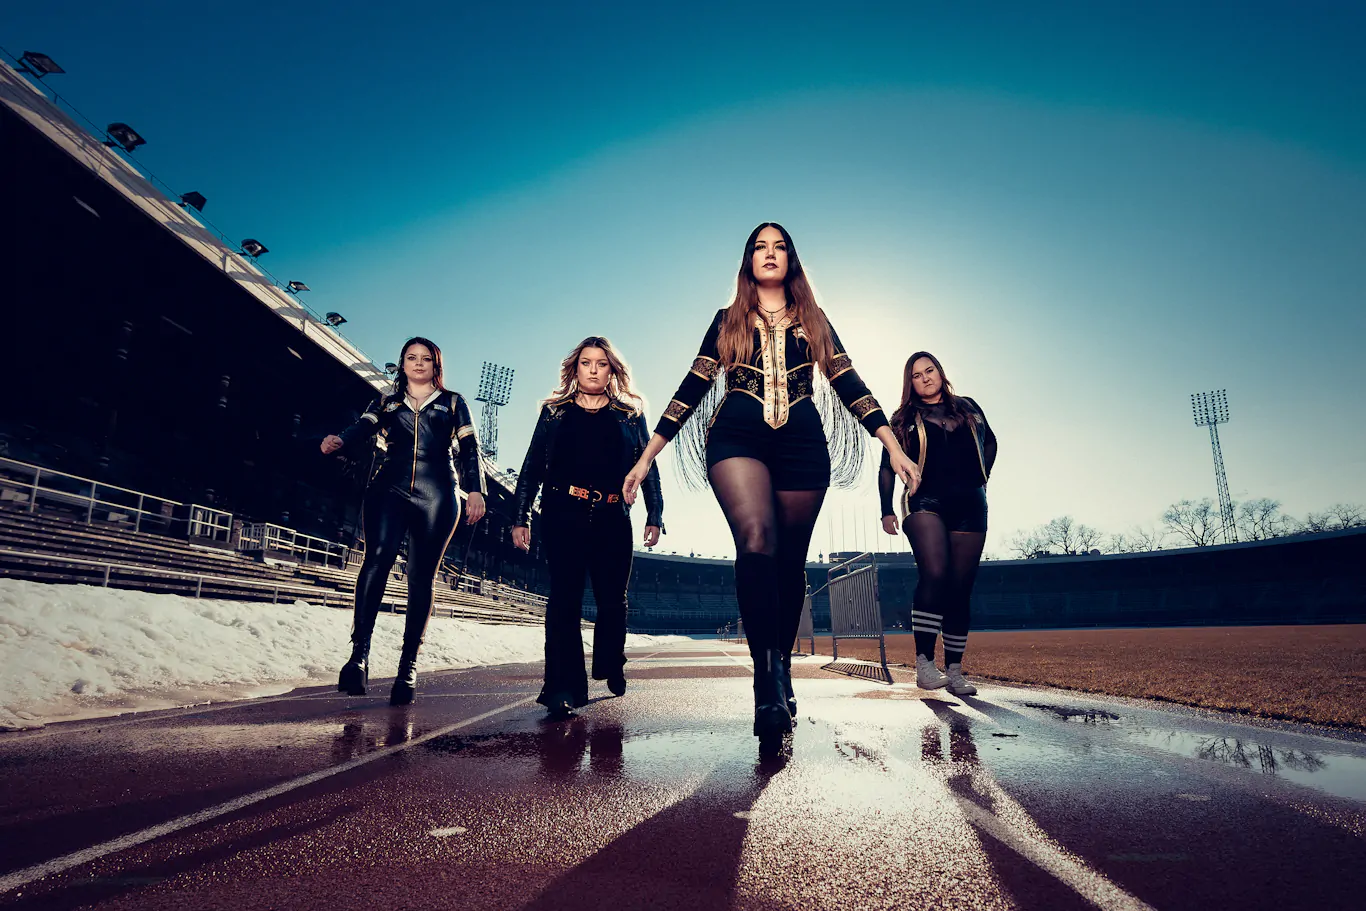 INTERVIEW: Emlee Johansson of THUNDERMOTHER discusses Black And Gold EP